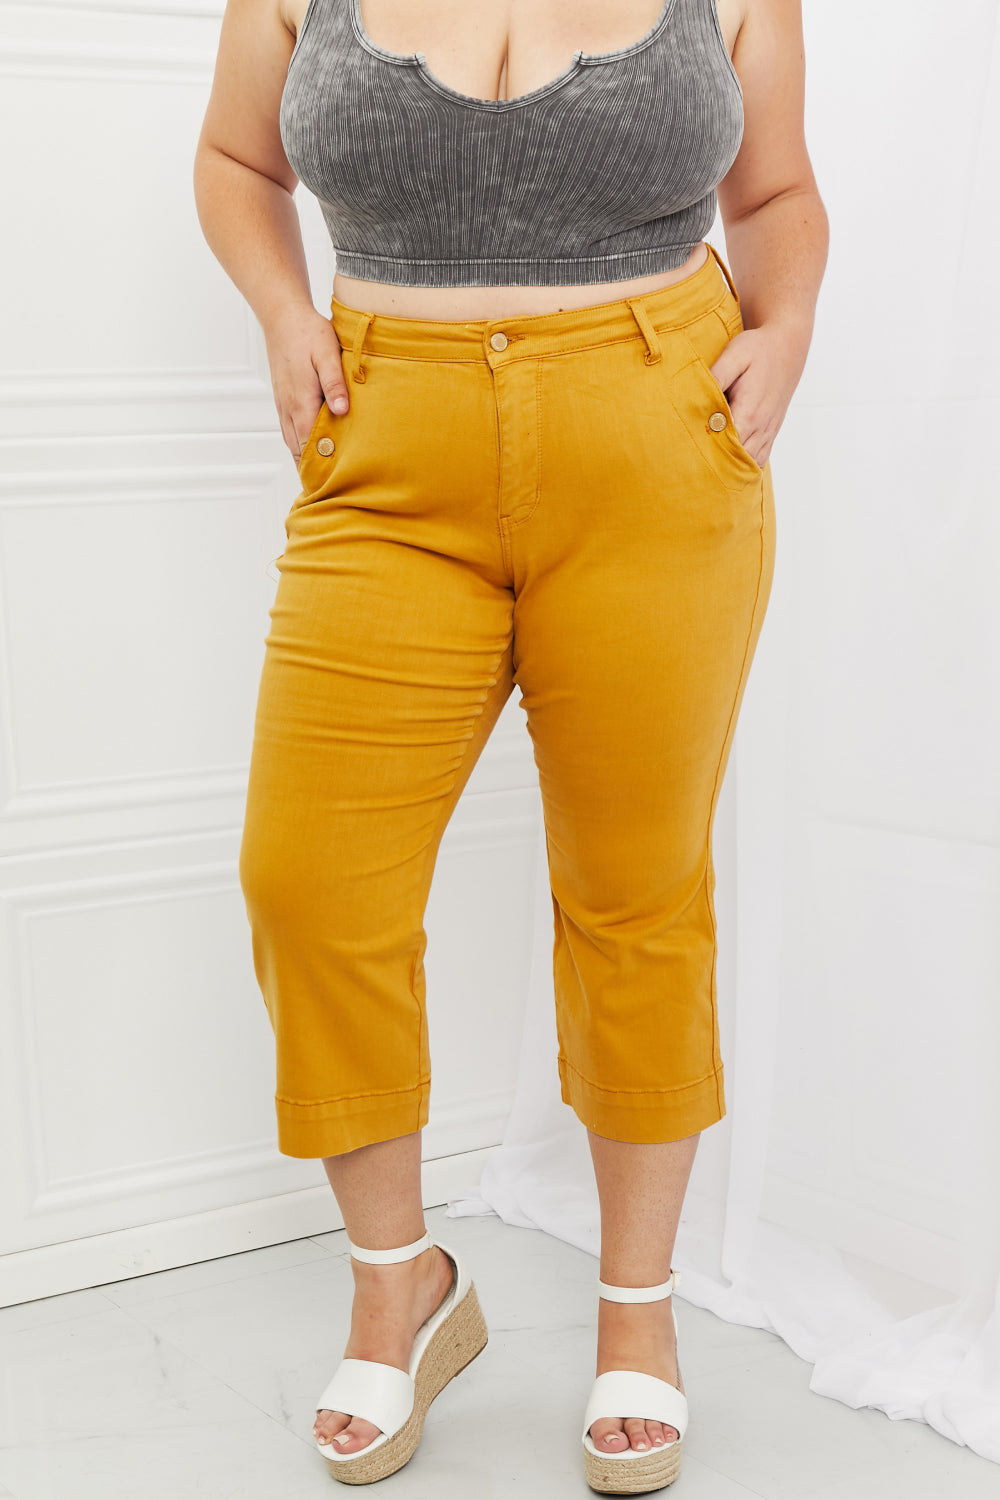 Judy Blue Straight Leg Cropped Jeans* - AnnRose Boutique